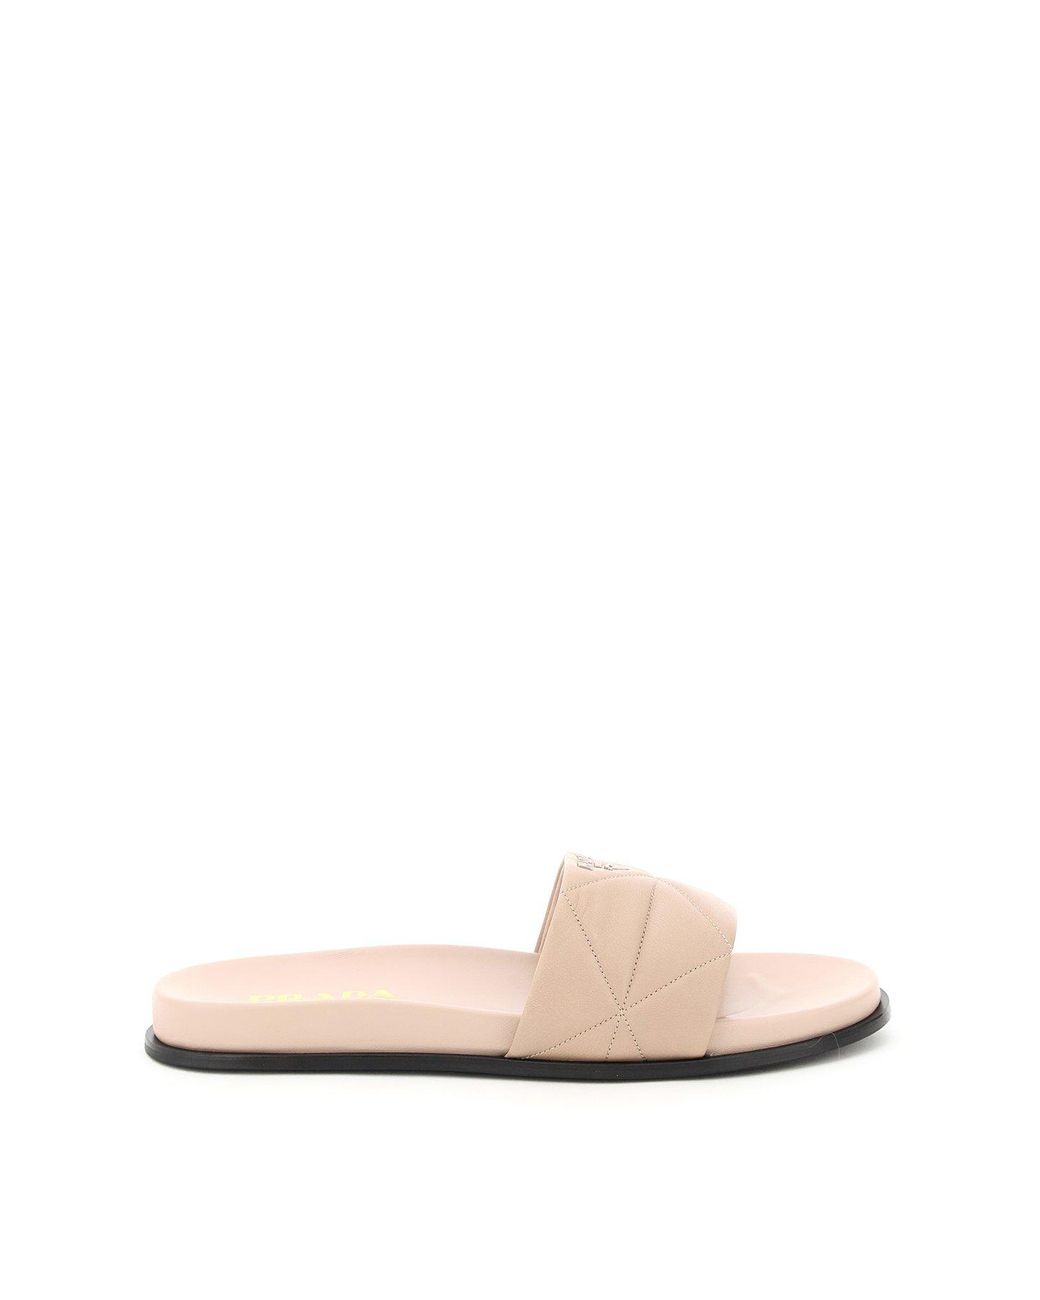 Prada Leather Logo Quilted Slides in Beige (Natural) - Lyst